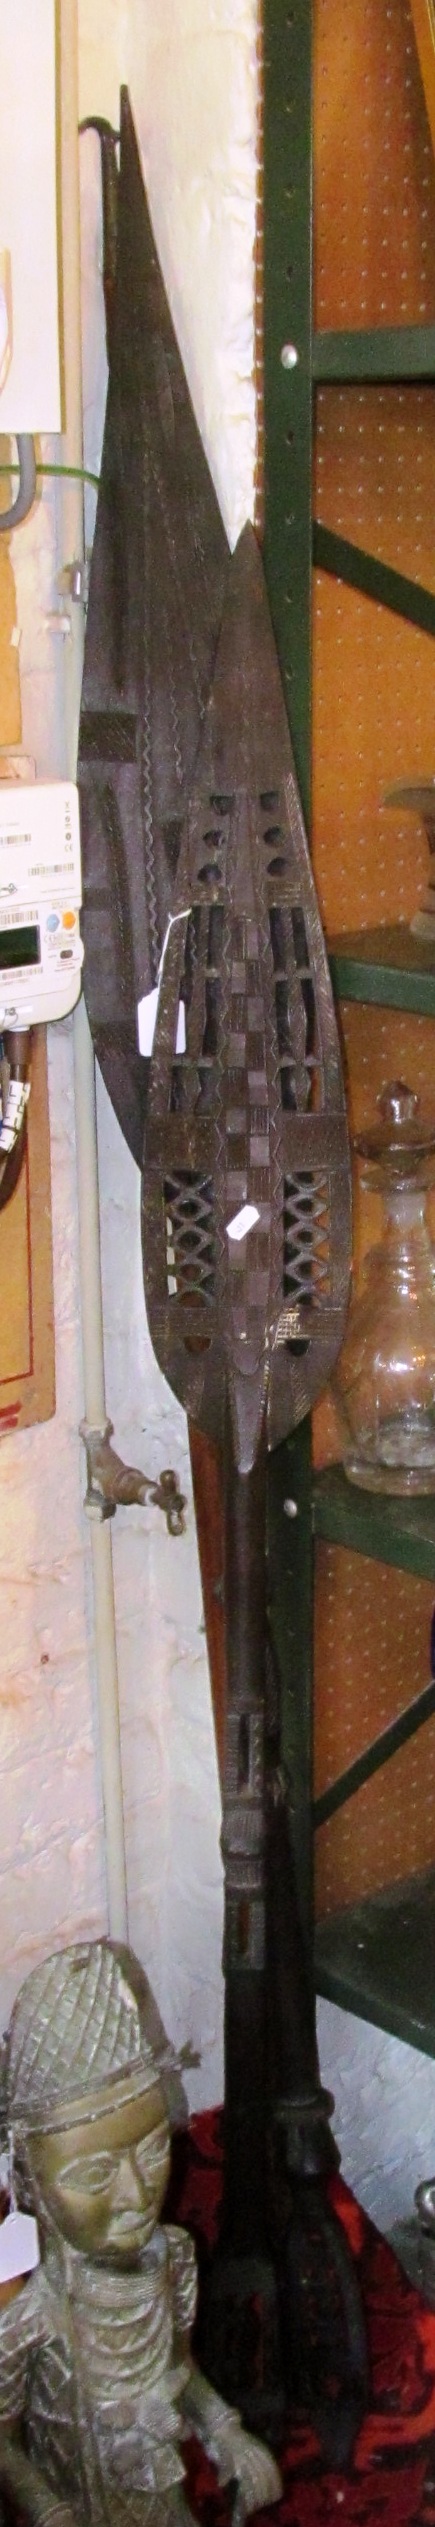 Two African ceremonial spears - Image 3 of 3